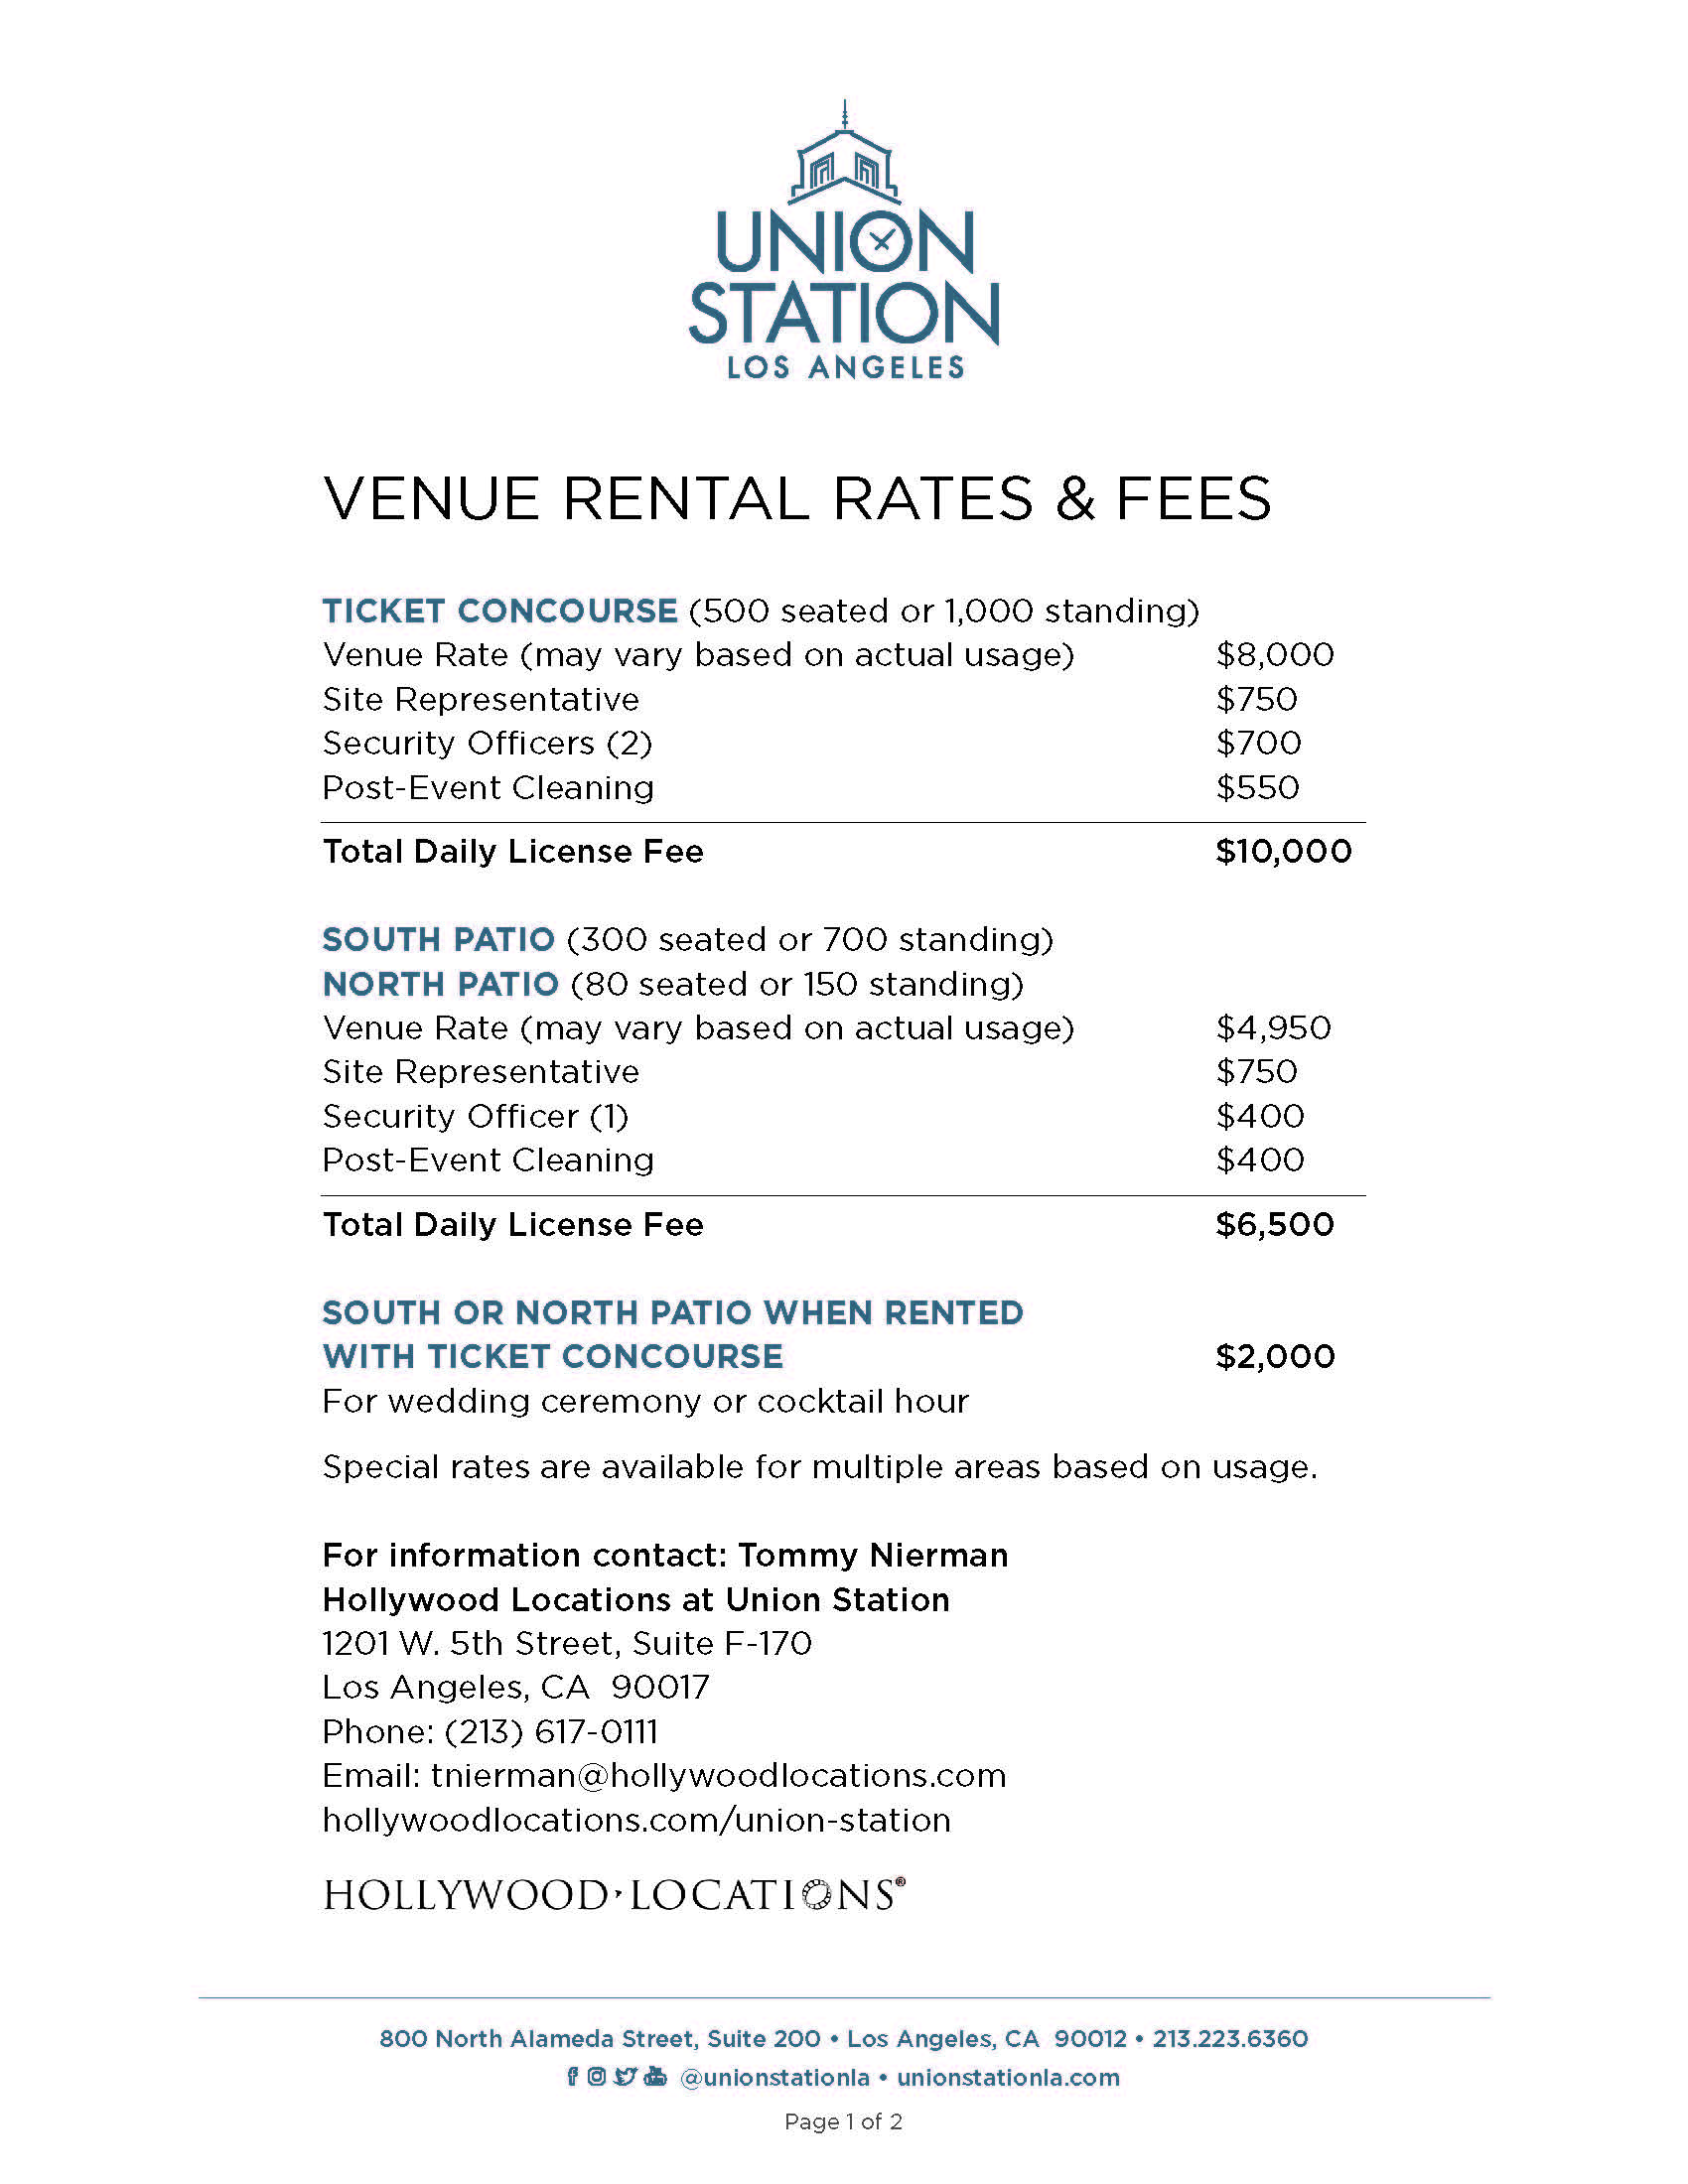 union-station-venue-rental-rates-and-fees_page_1